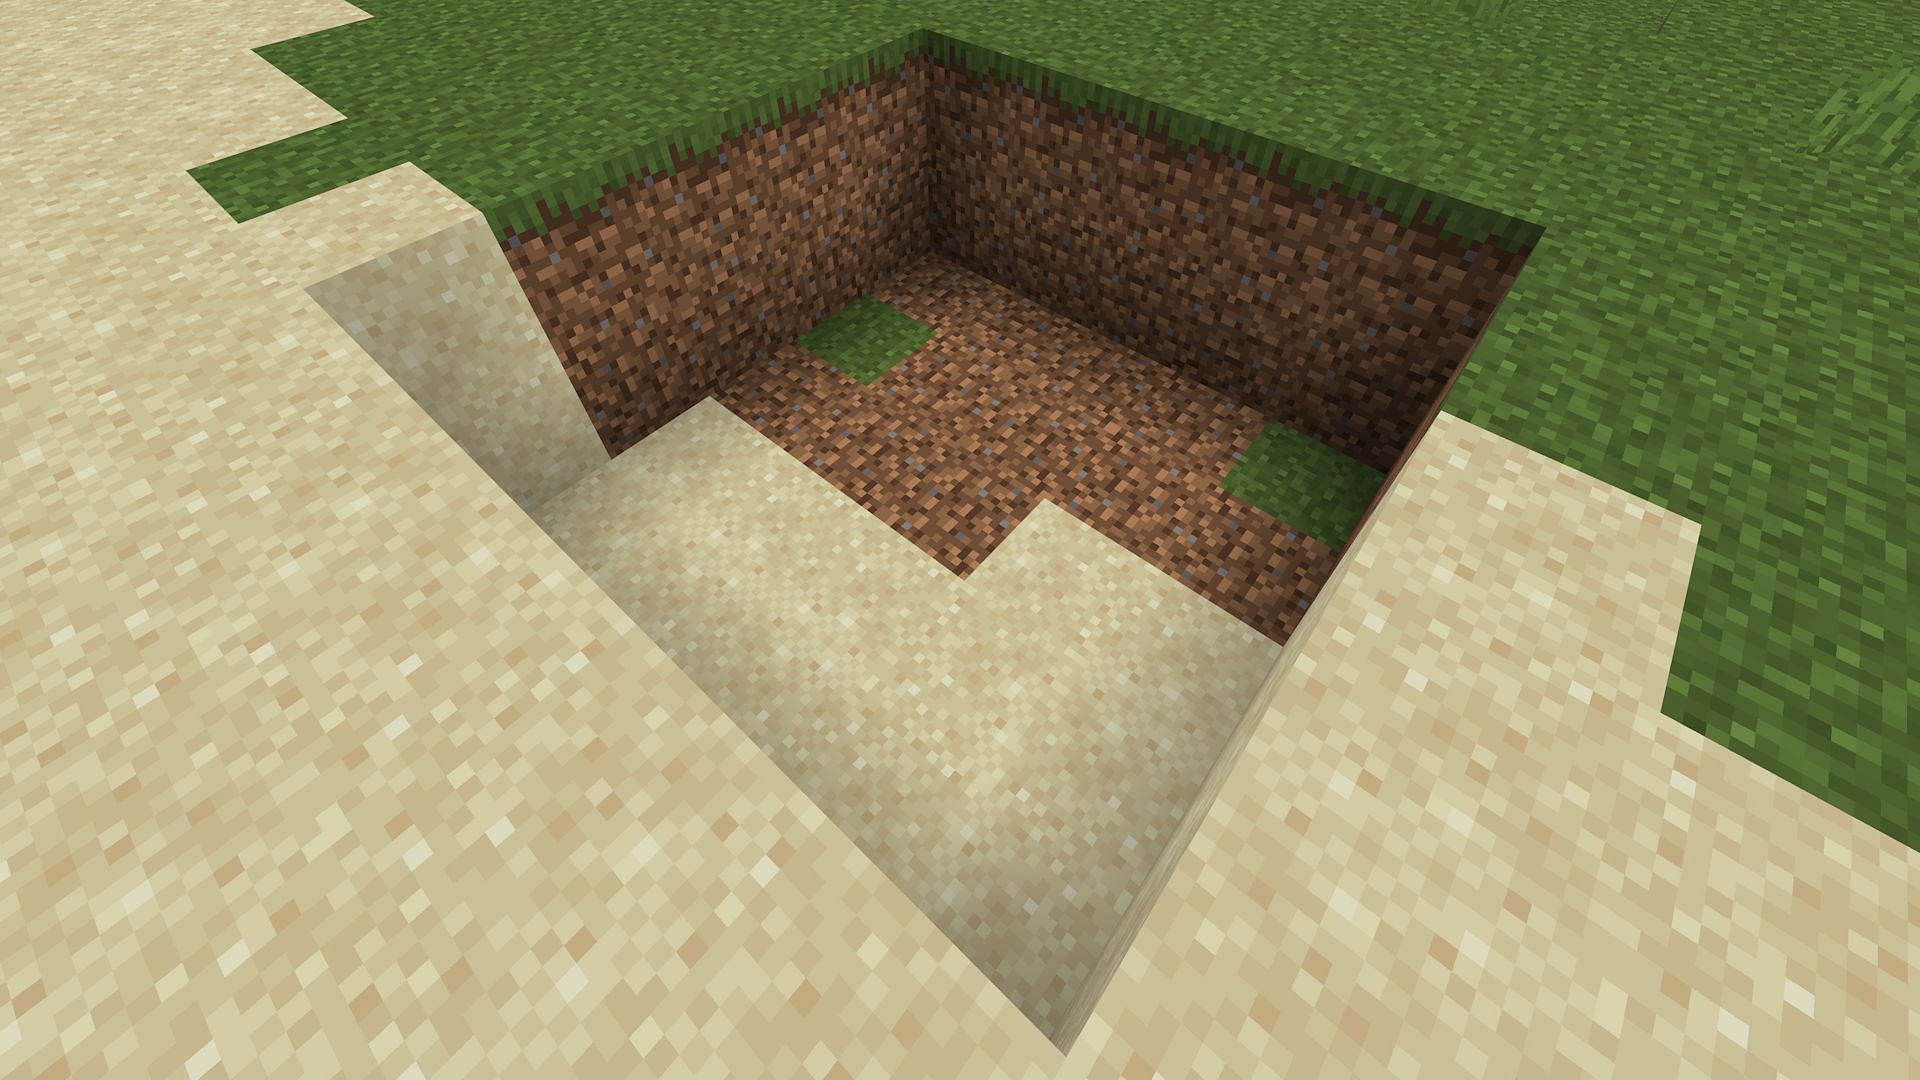 The 5x5 pit in the ground (Image via Mojang)